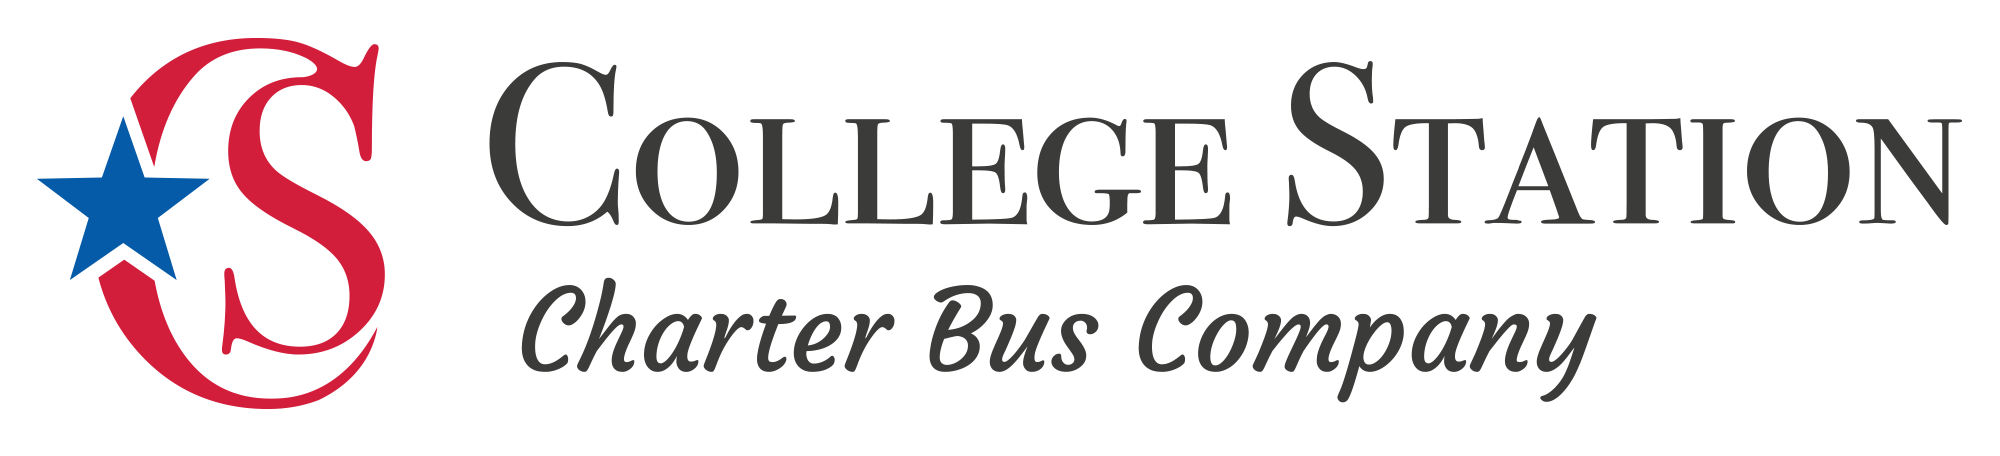 College Station charter bus